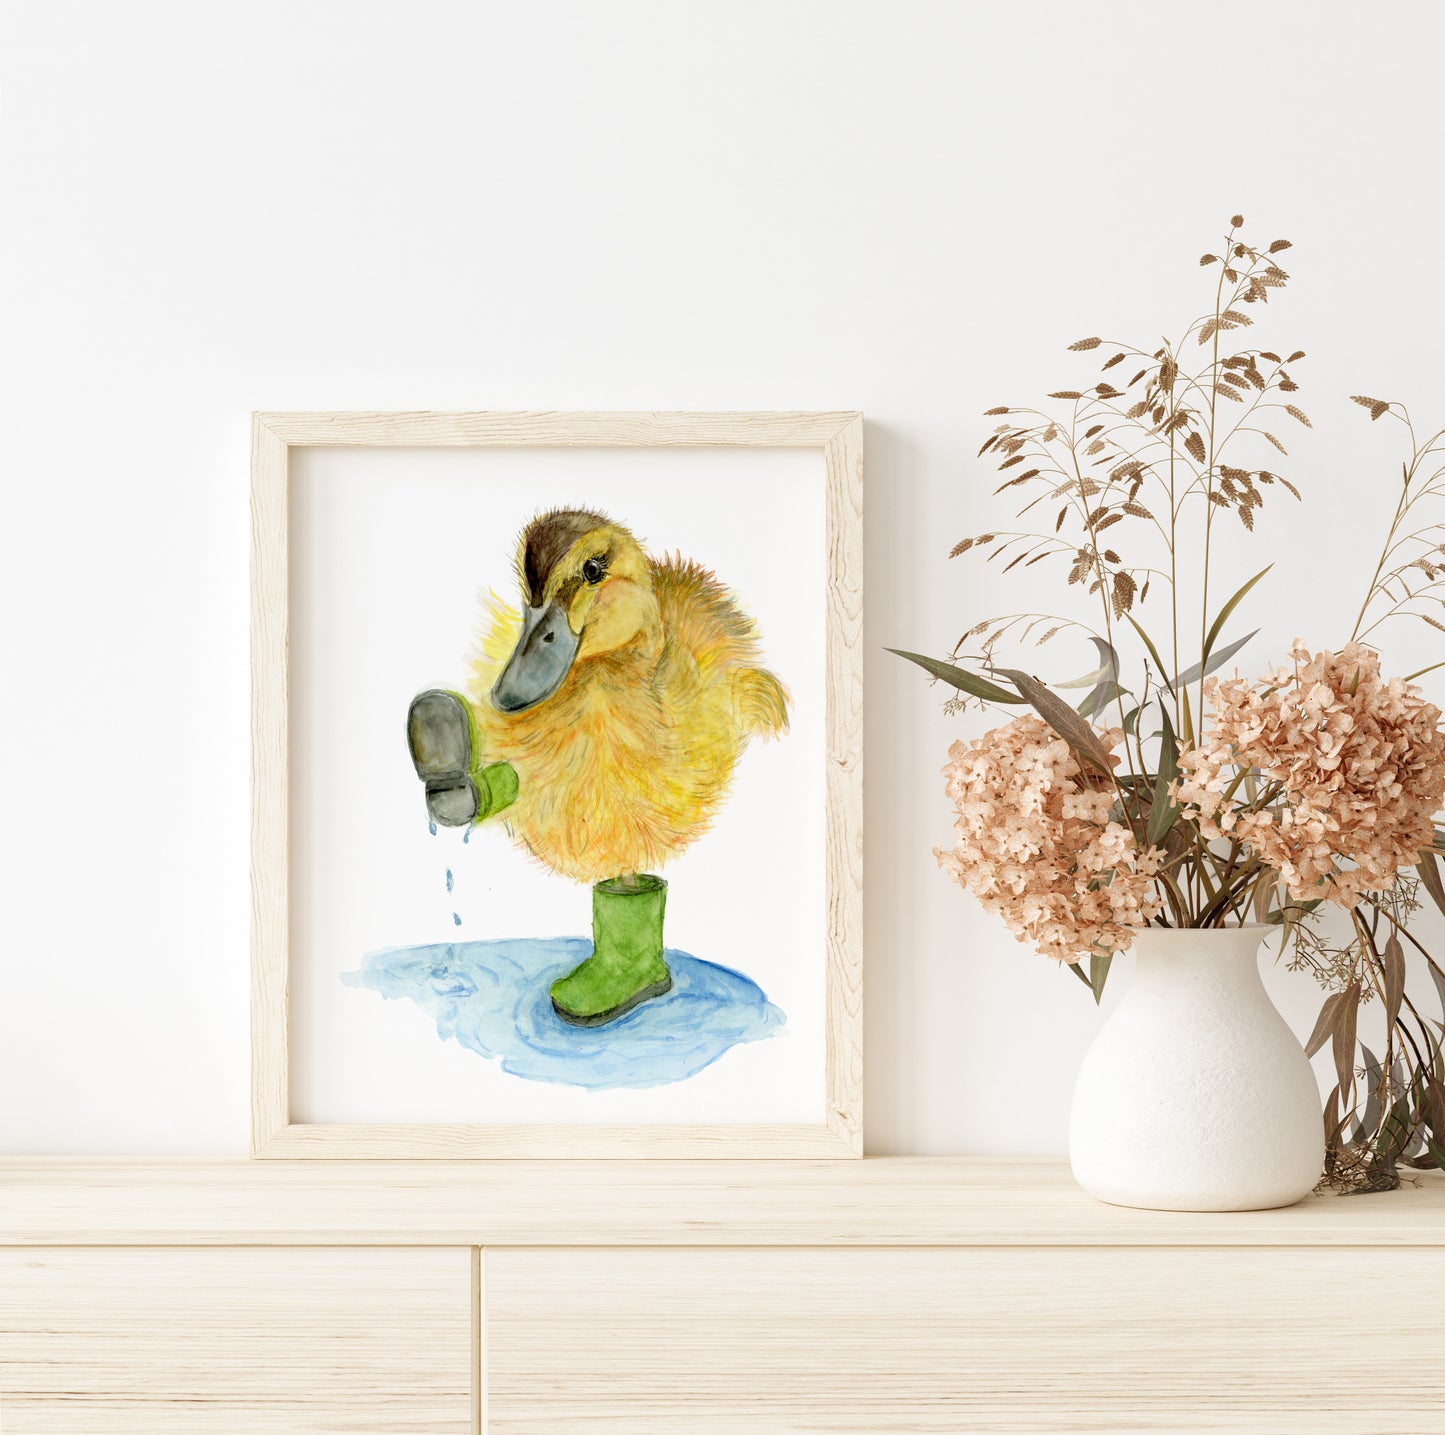 Baby Duckling with Boots on - Lora Cavallin Art